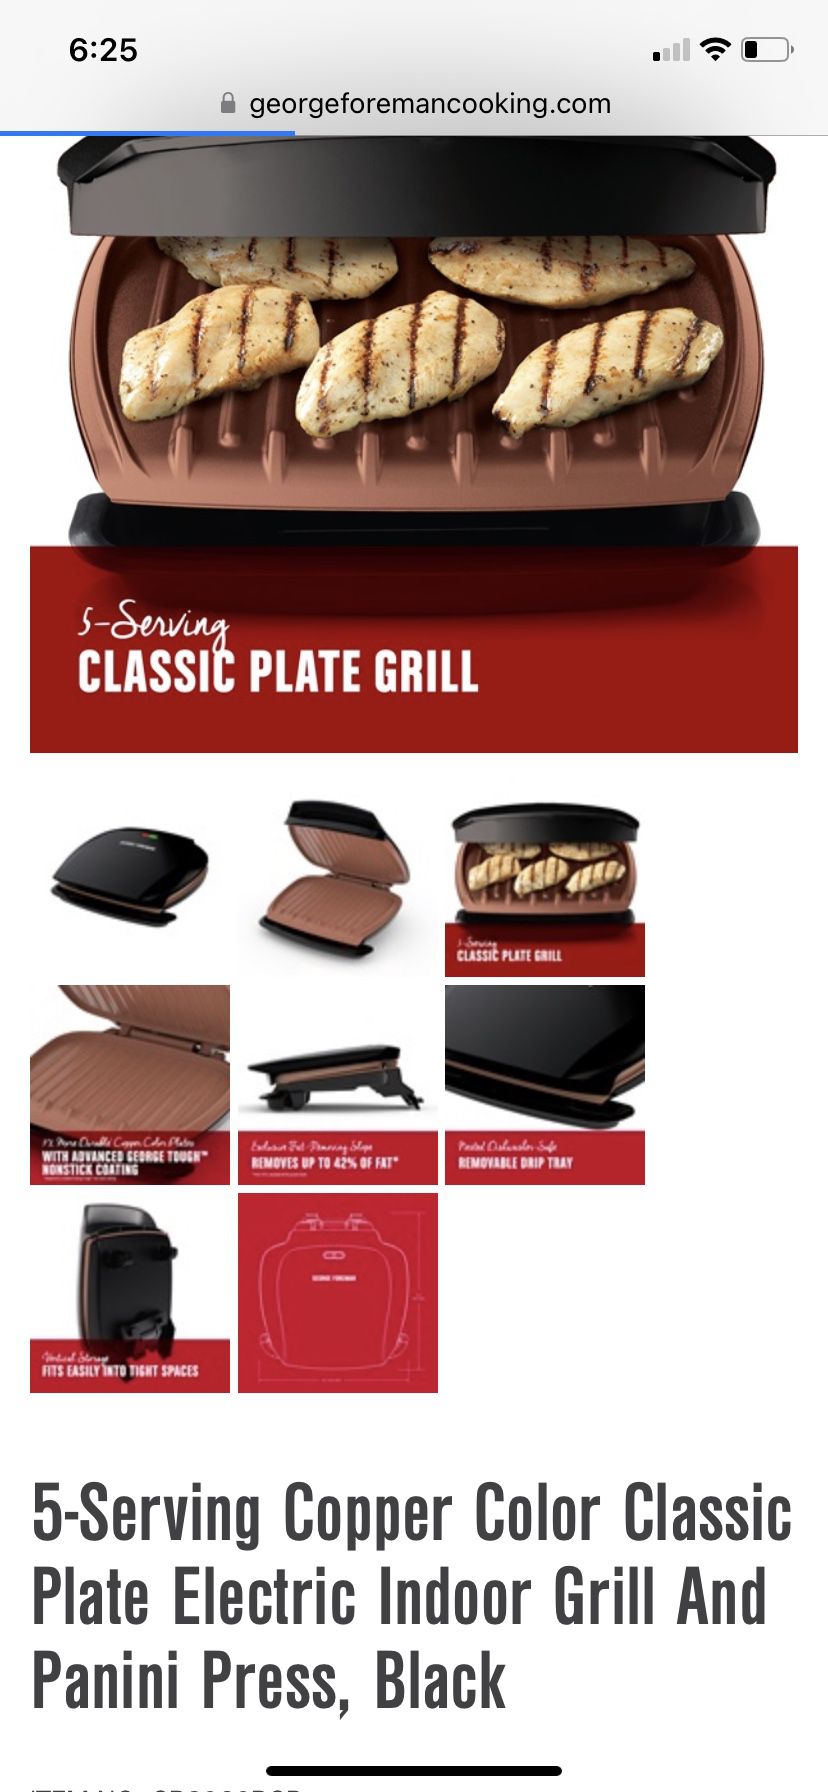 5-Serving Classic Plate Electric Indoor Grill and Panini Press